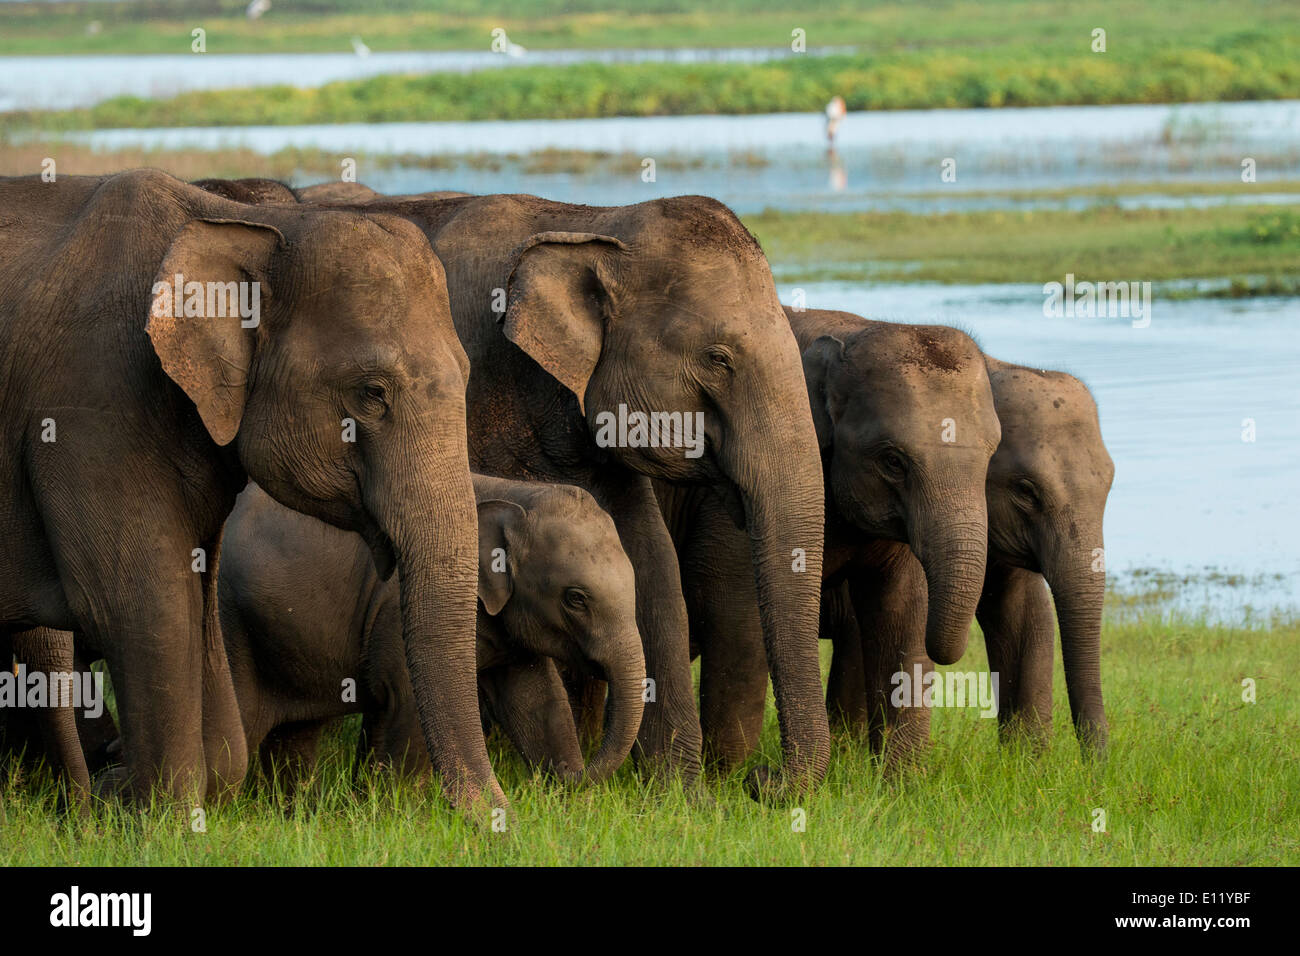 Herd of elephants grazing peacefully on the receding waters of the Minneriya Reservoir in North Central Sri Lanka Stock Photo